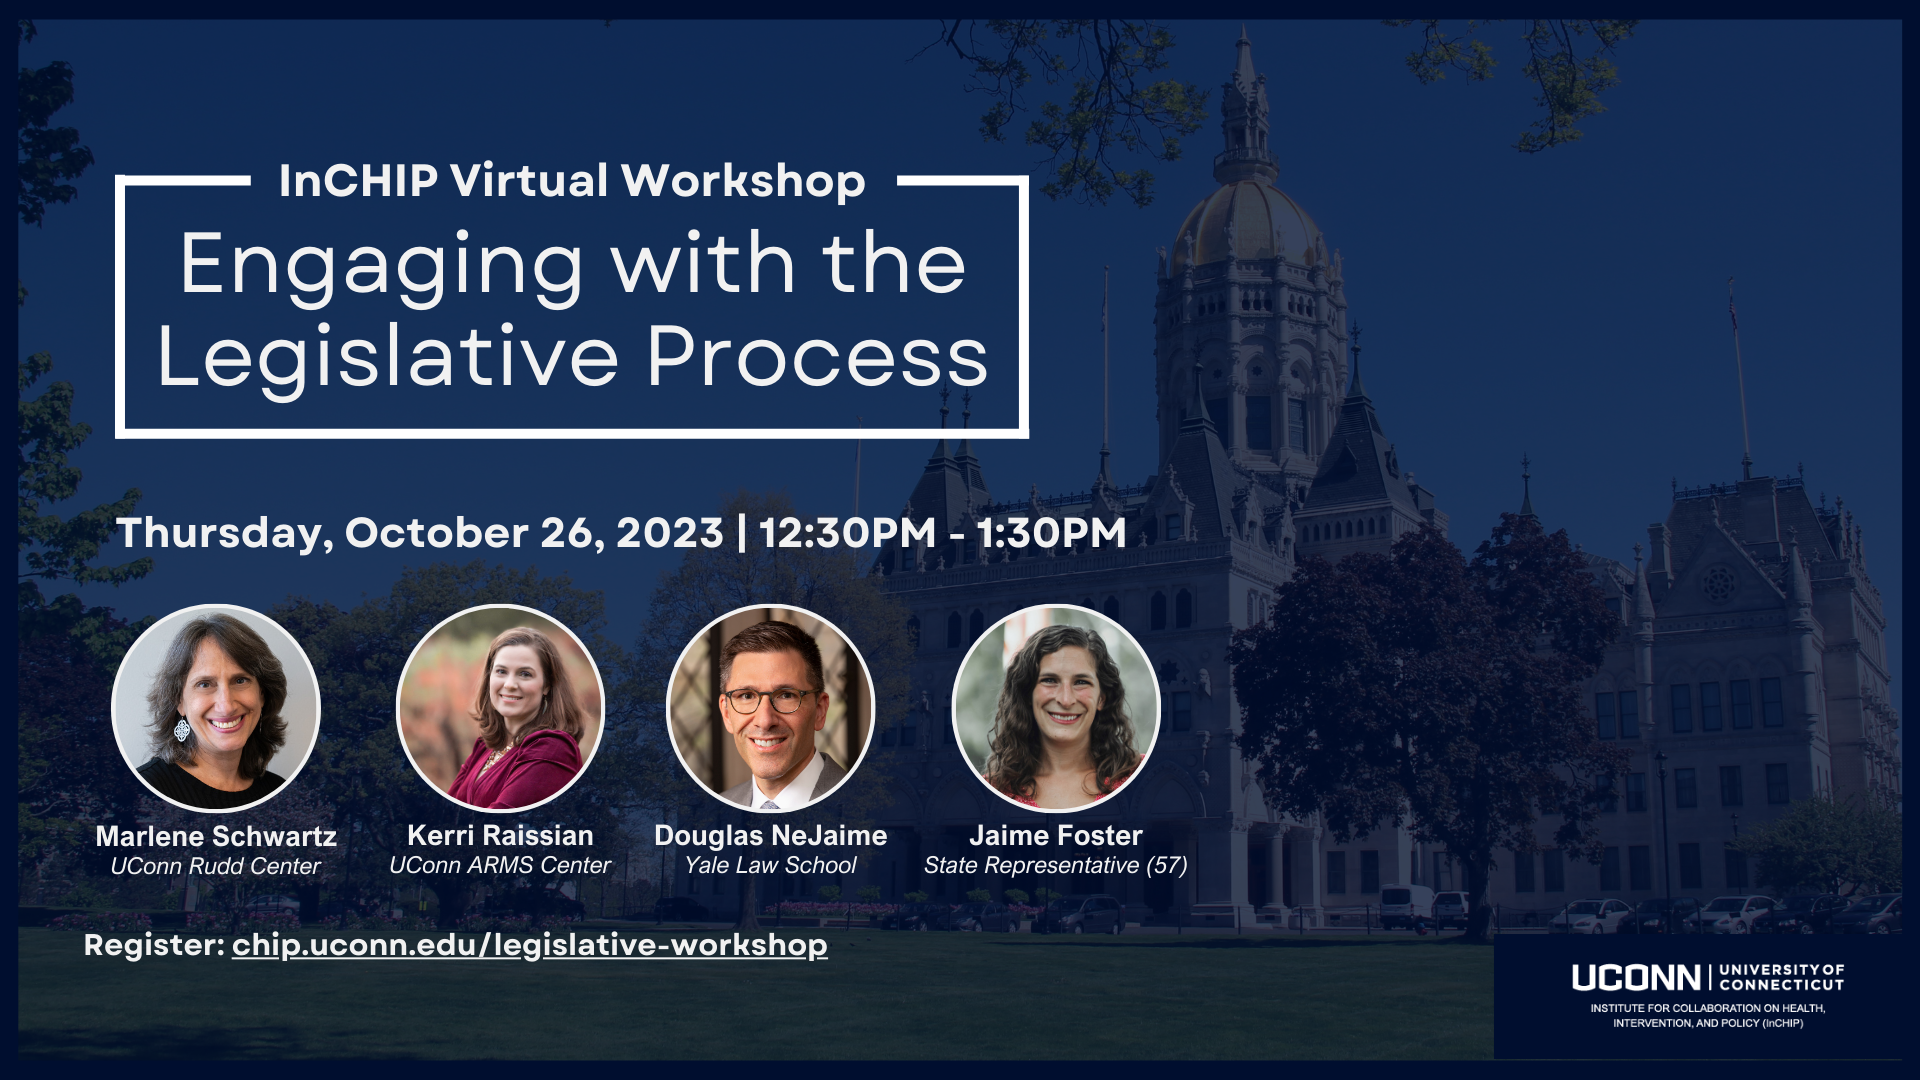 Graphic promoting InCHIP's virtual workshop on engaging with the legislative process on October 26 at 12:30PM